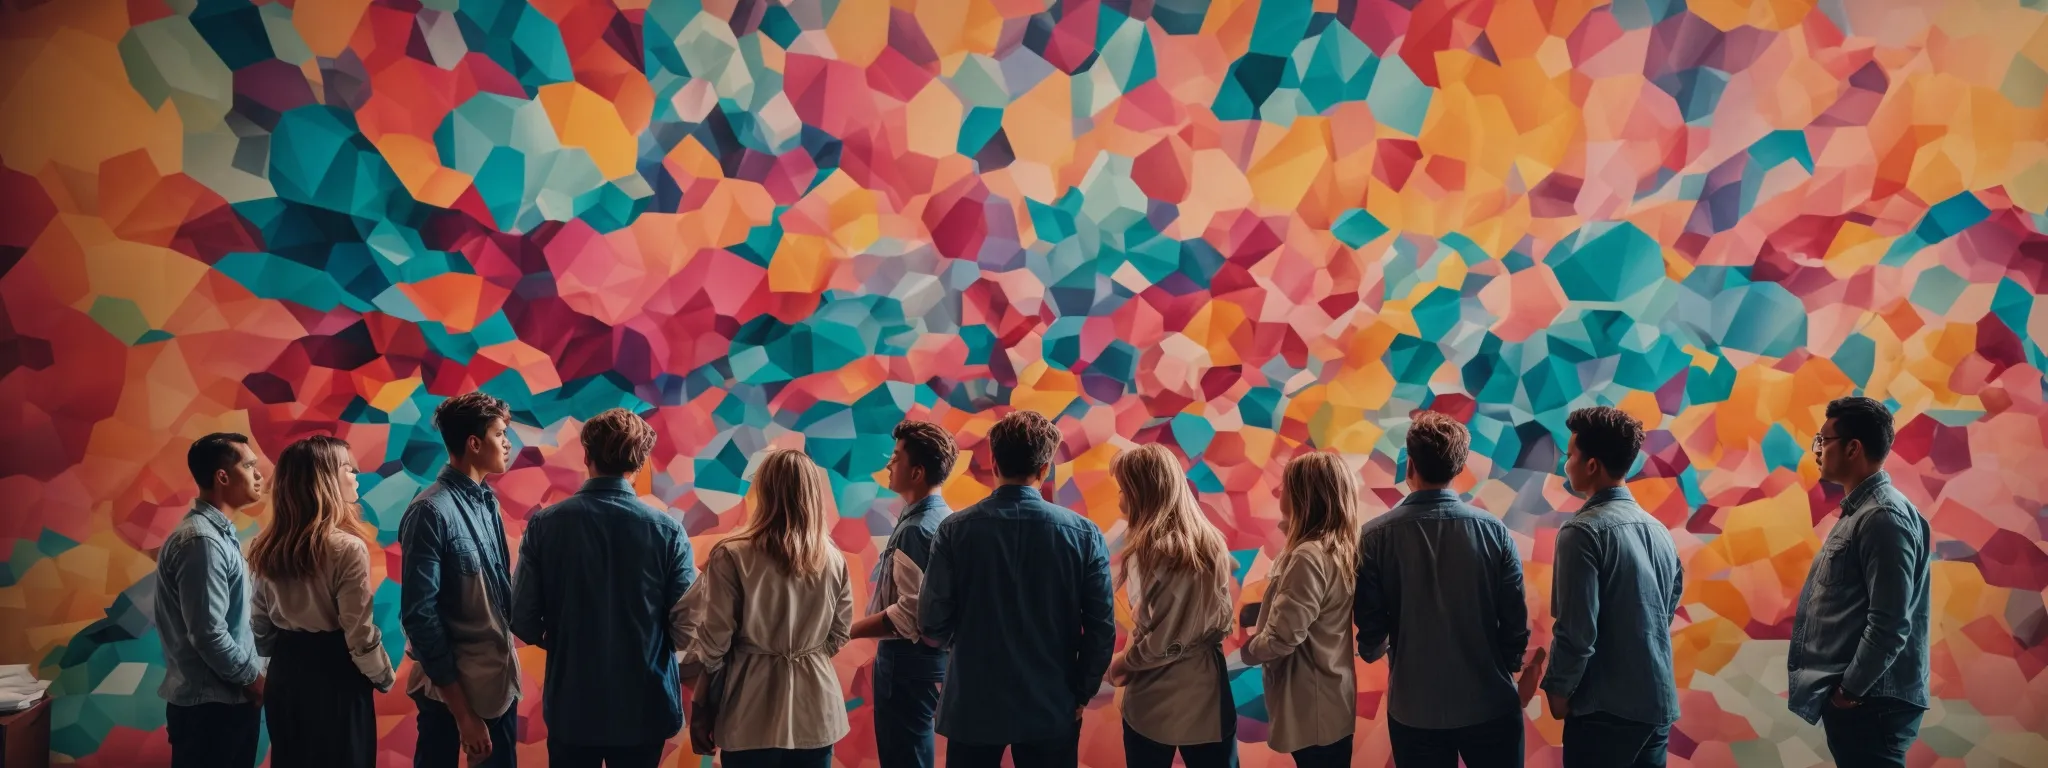 a brainstorming team stands gathered around a vibrant, abstract mural, symbolizing innovative marketing ideas.